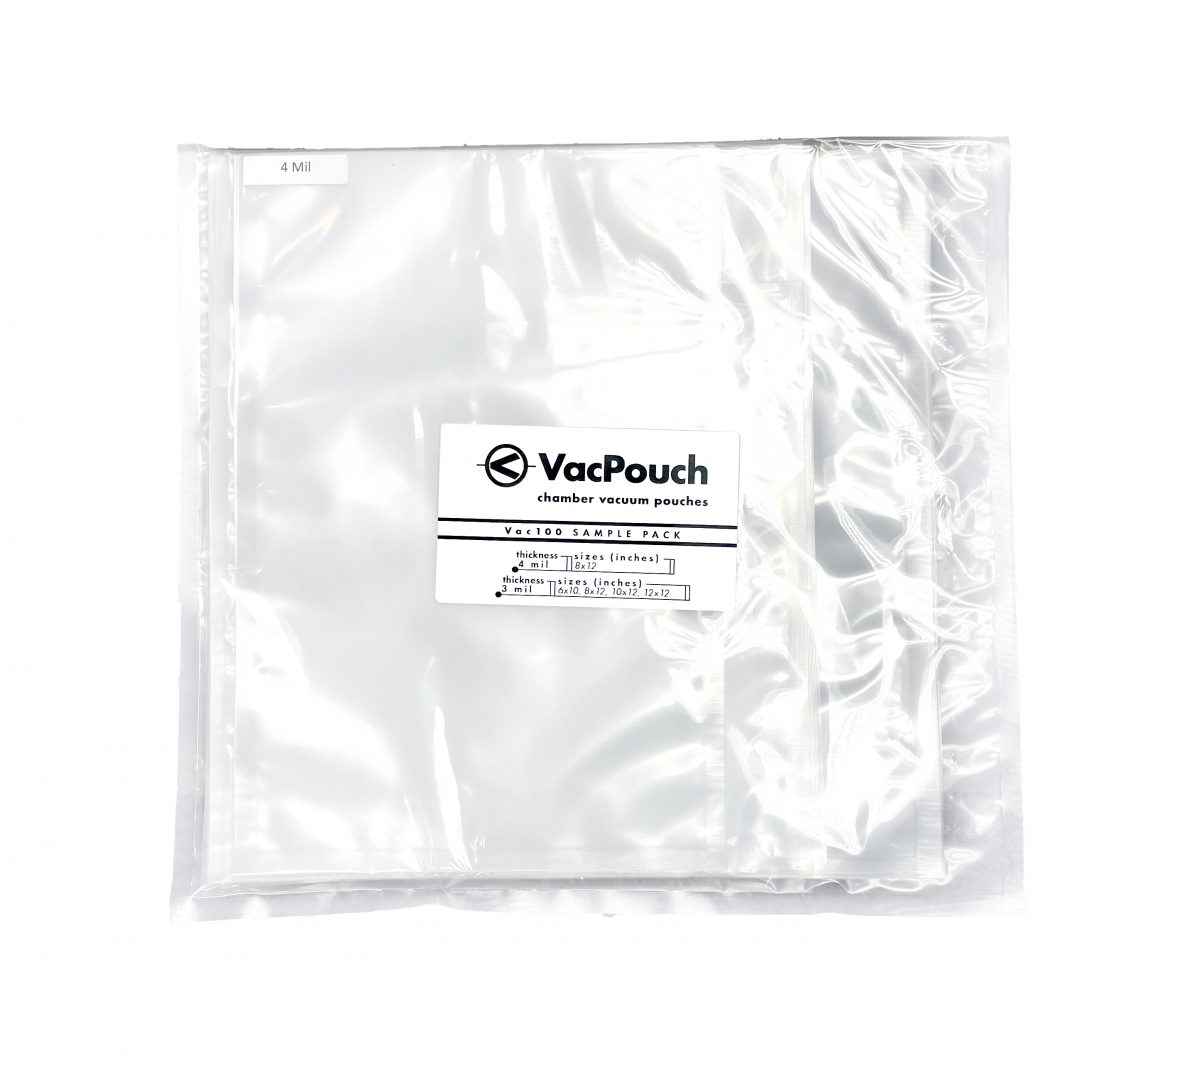 100 PACK - Chamber Vacuum Pouches (VacPouch) - JVR